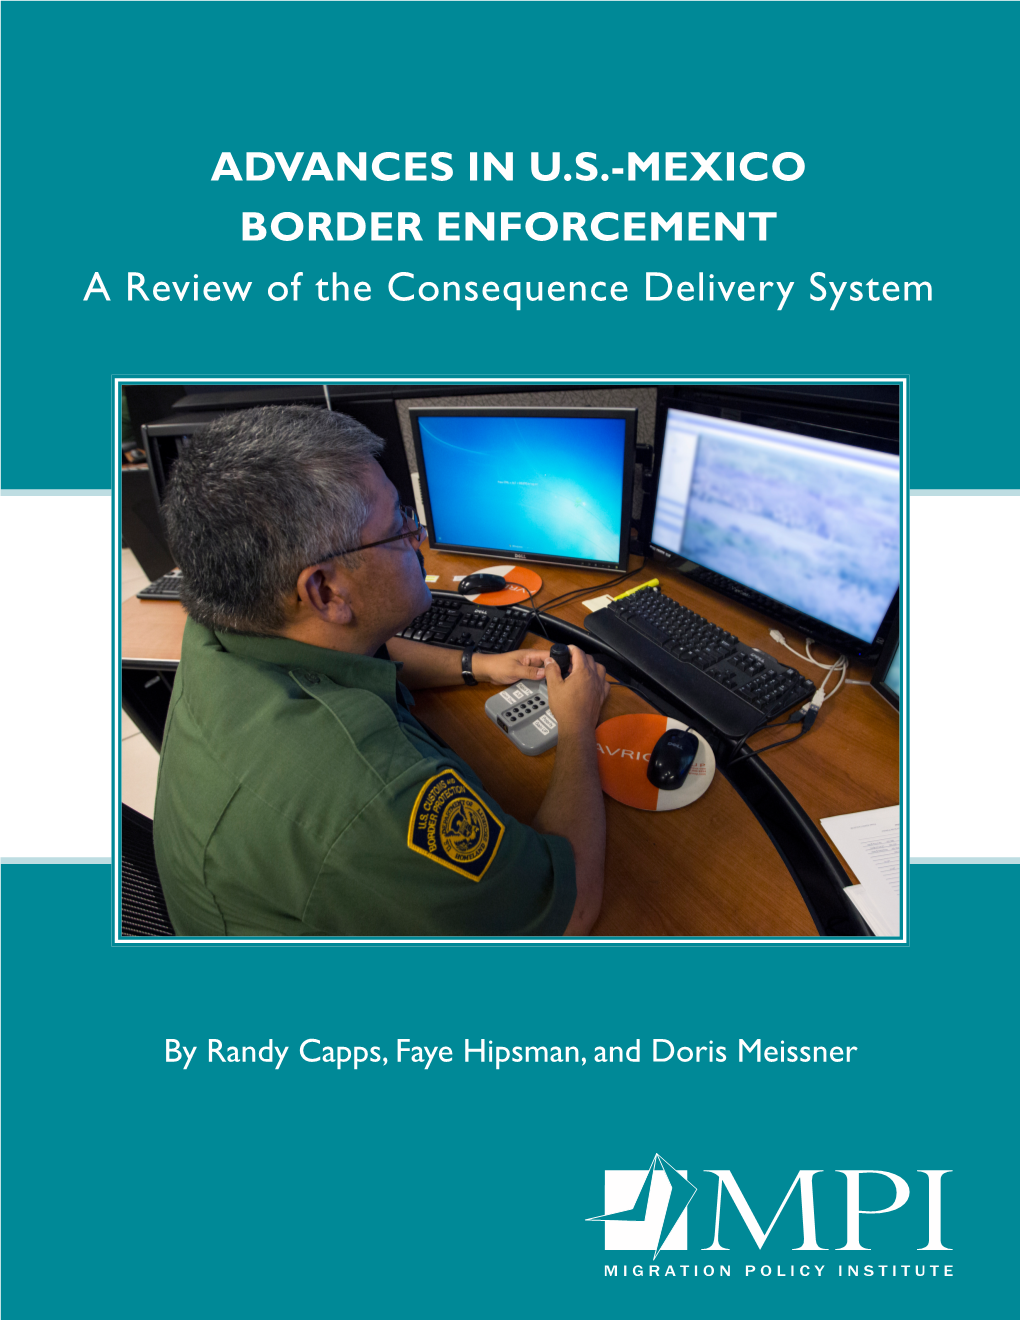 Advances in U.S.-Mexico Border Enforcement: a Review of the Consequence Delivery System